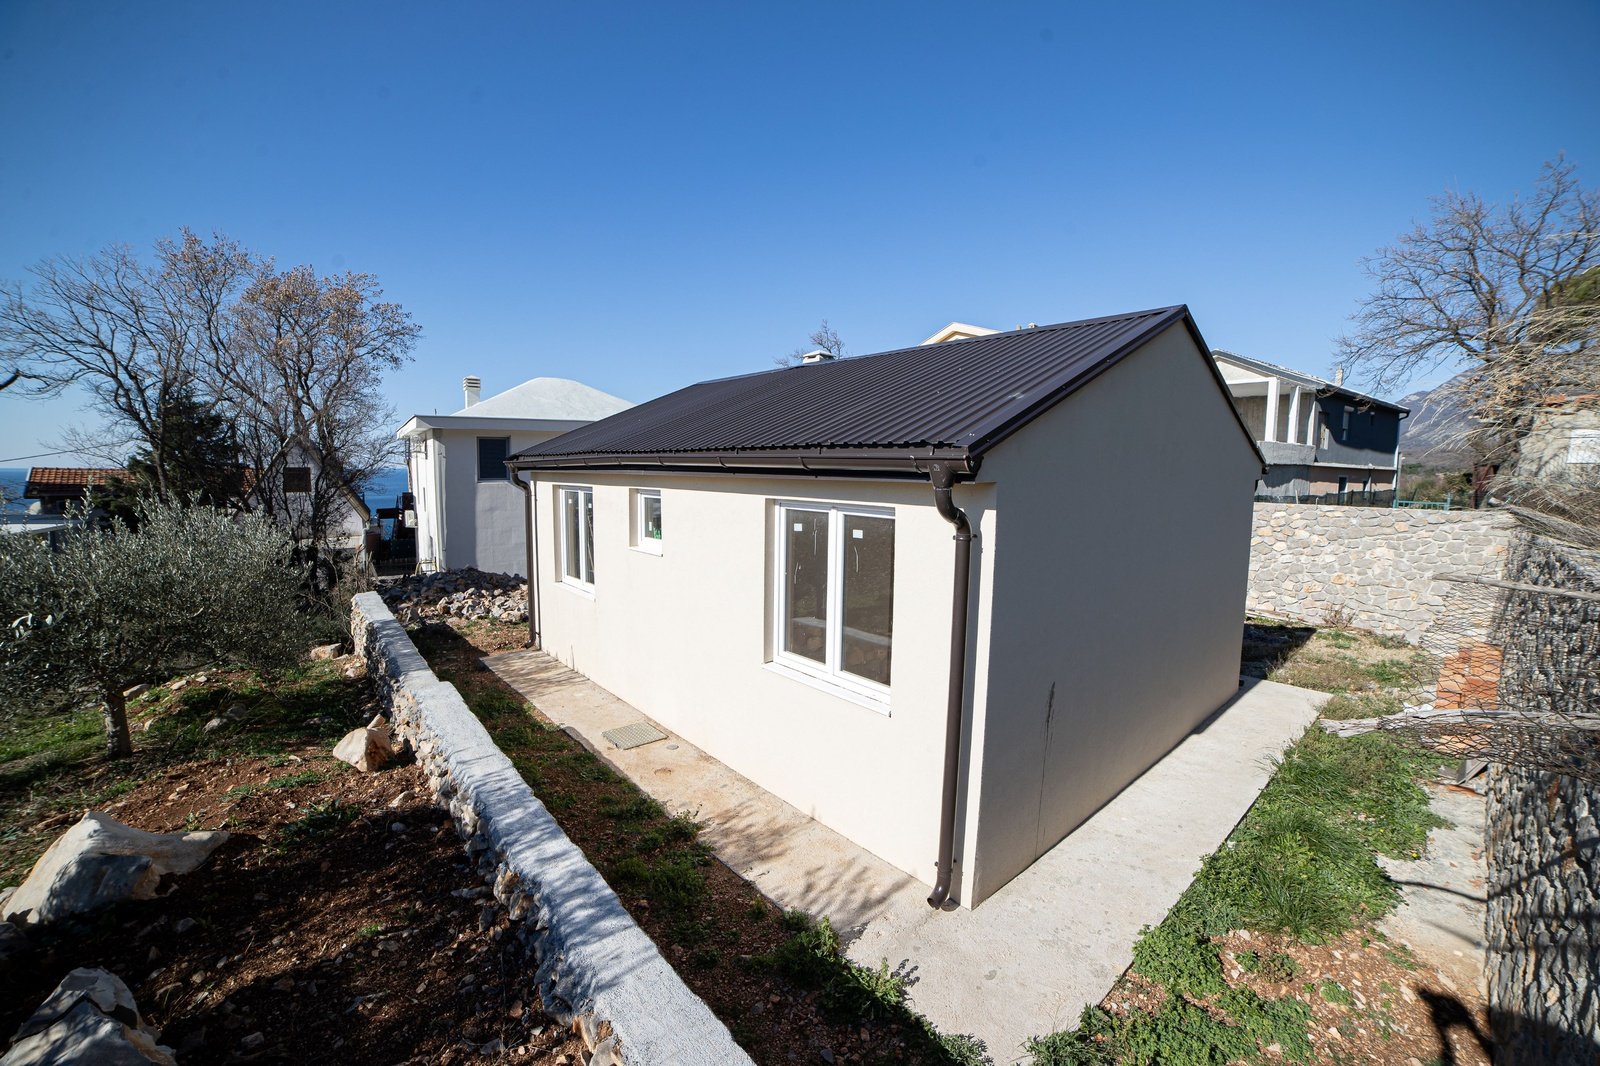 Senka’s house located in Bar, a coastal town in southern Montenegro, was constructed through the Regional Housing Programme, established in 2012.